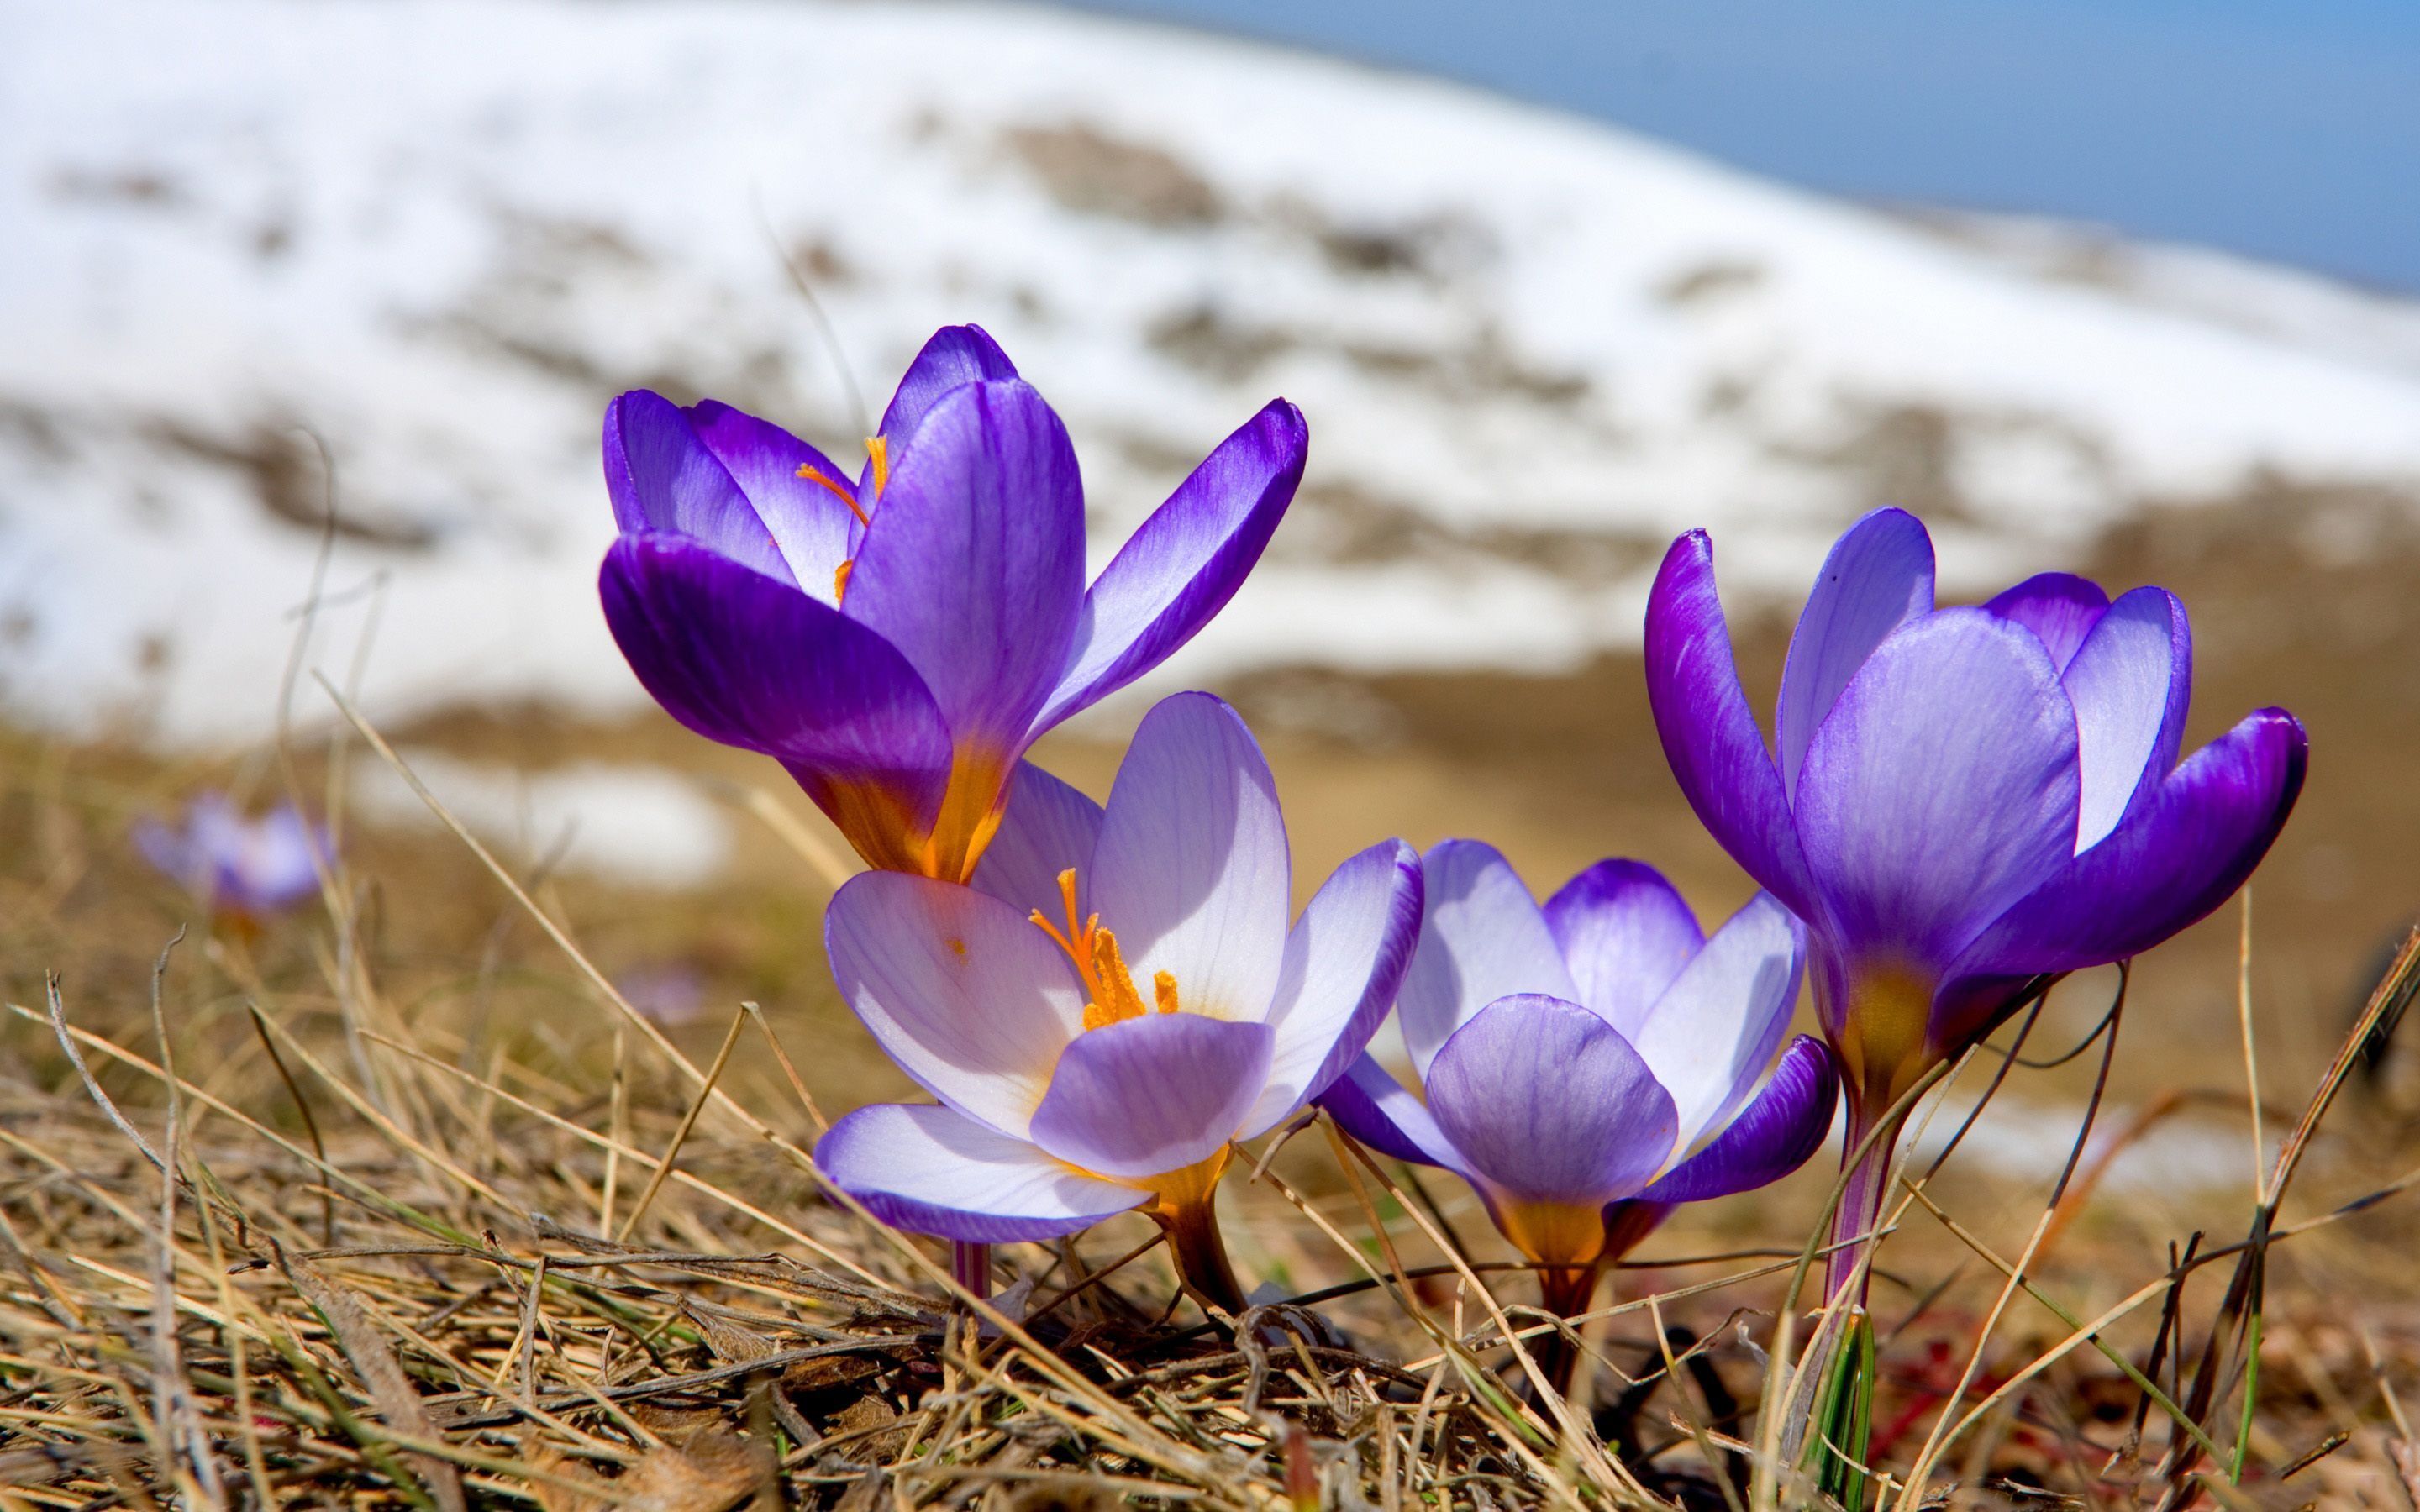 4597_Crocuses-just-emerged-from-the-snow-spring-HD-wallpaper.jpg